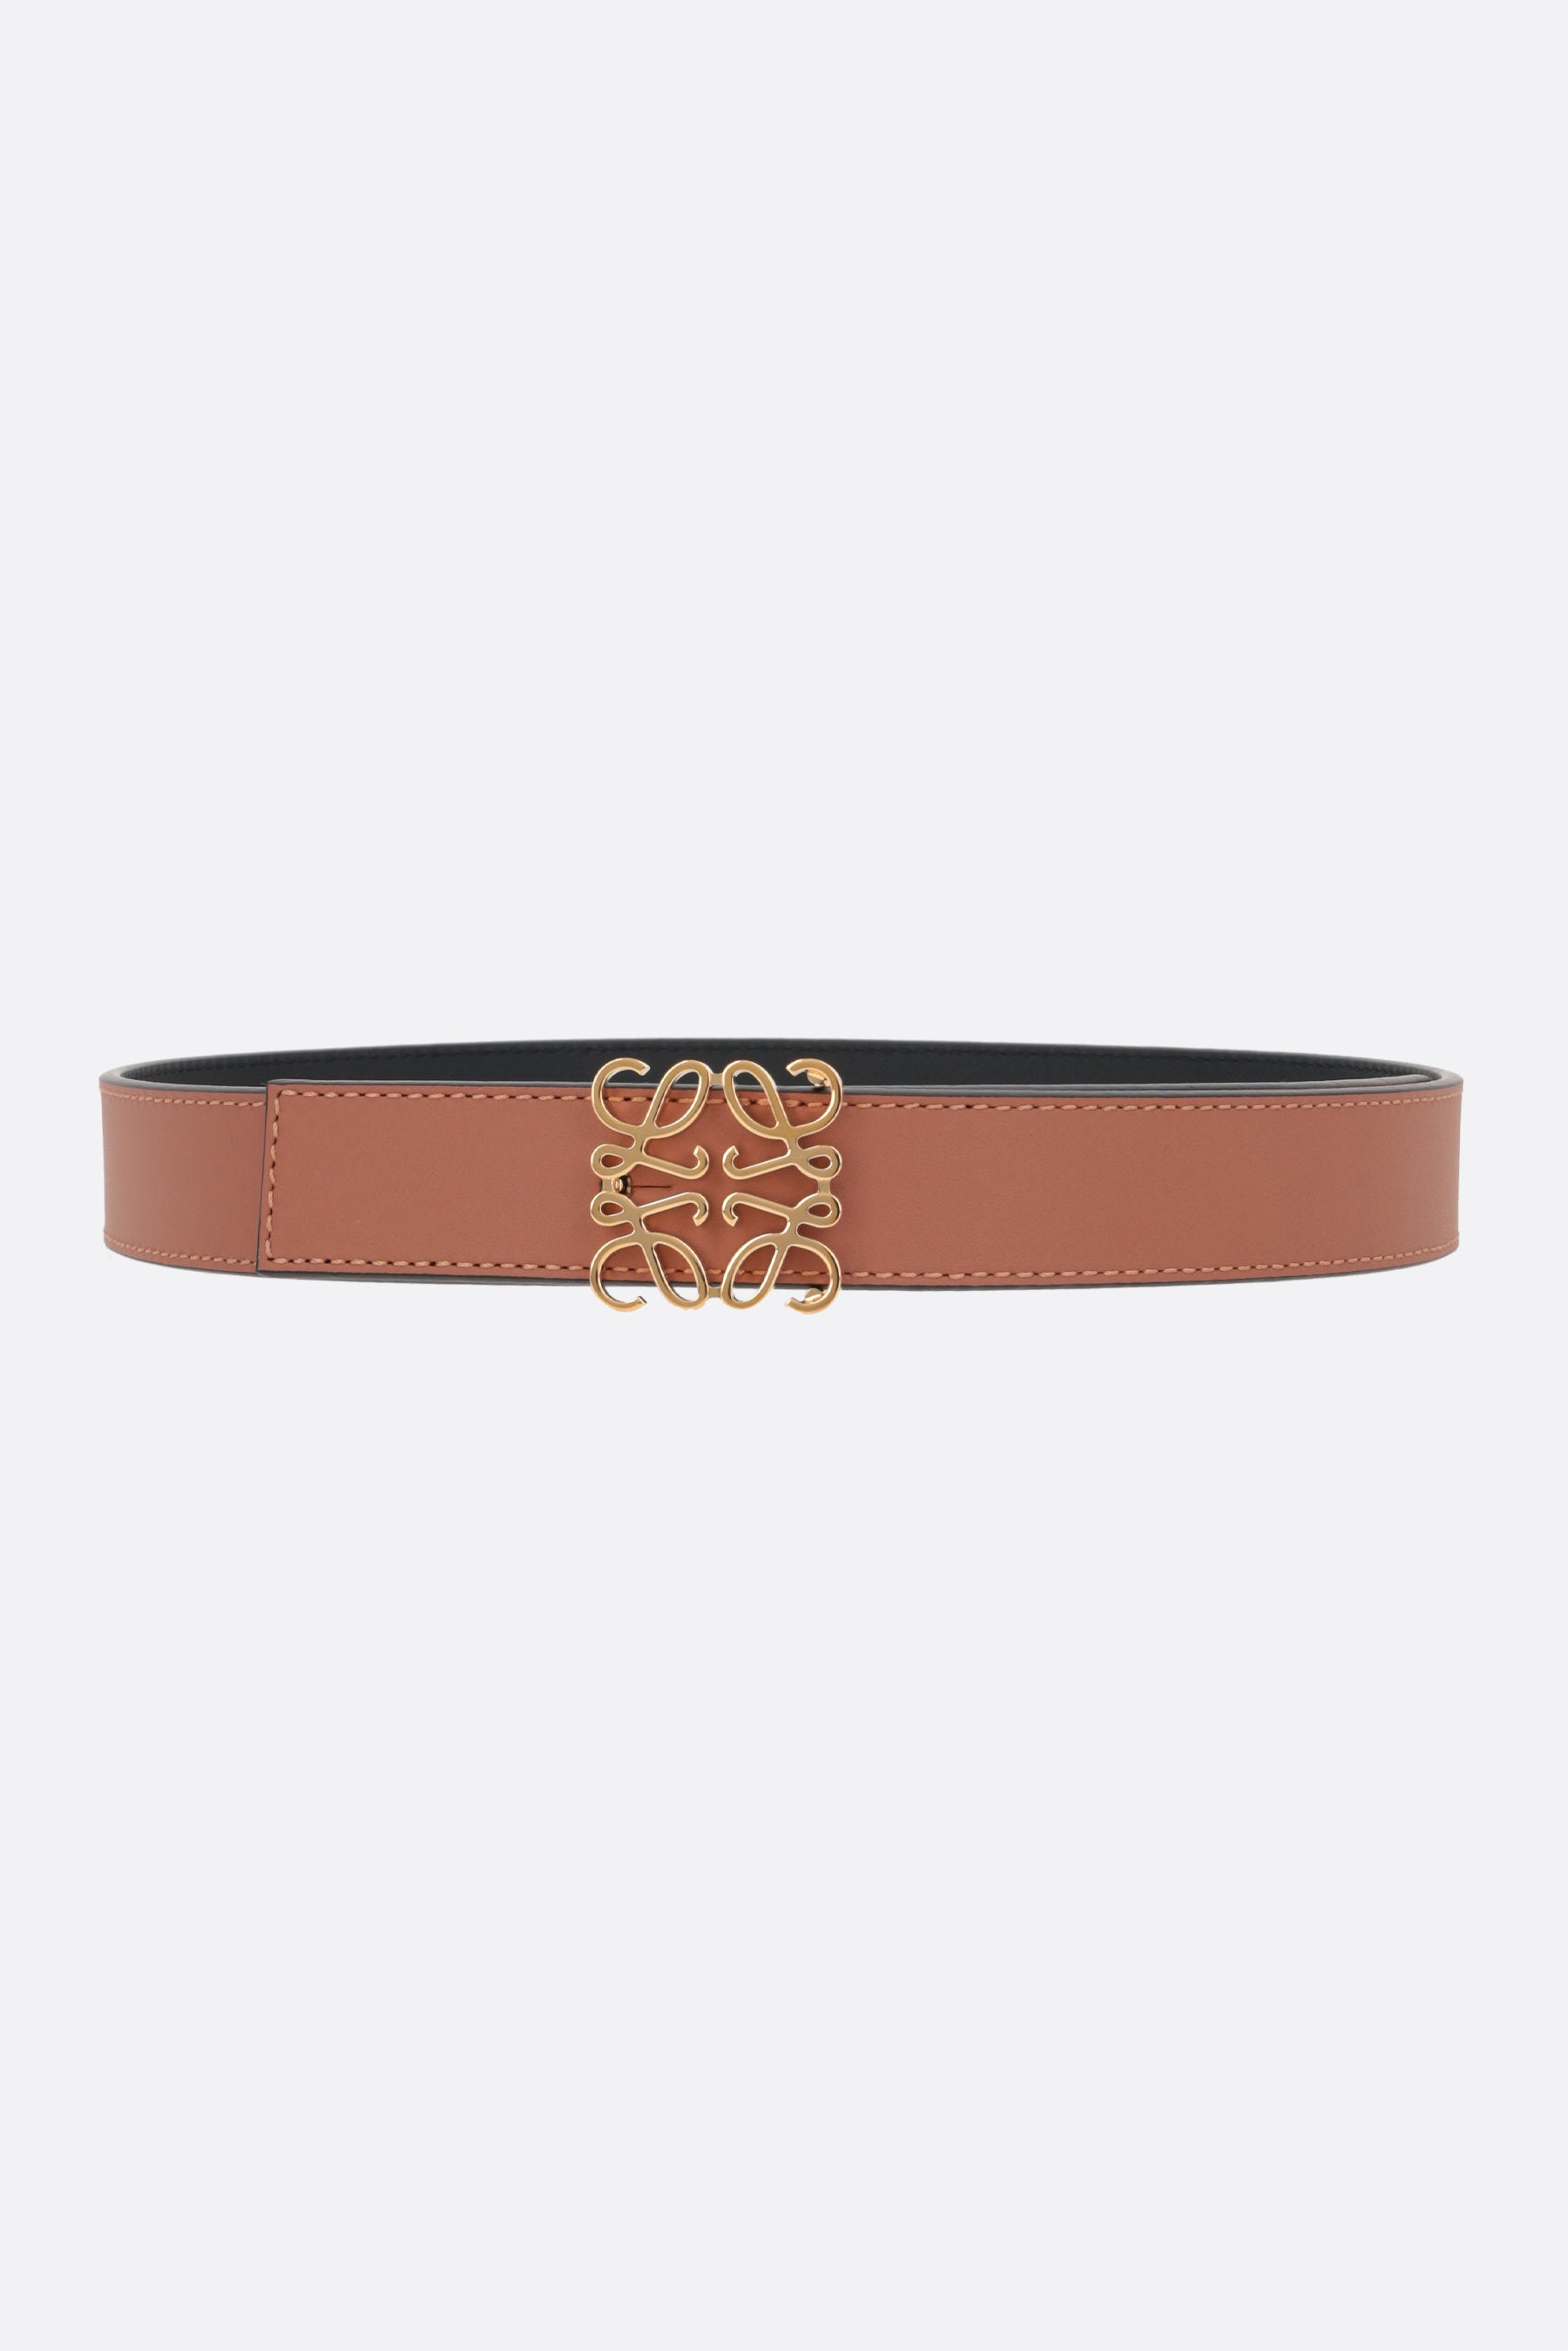 Anagram smooth leather reversible belt